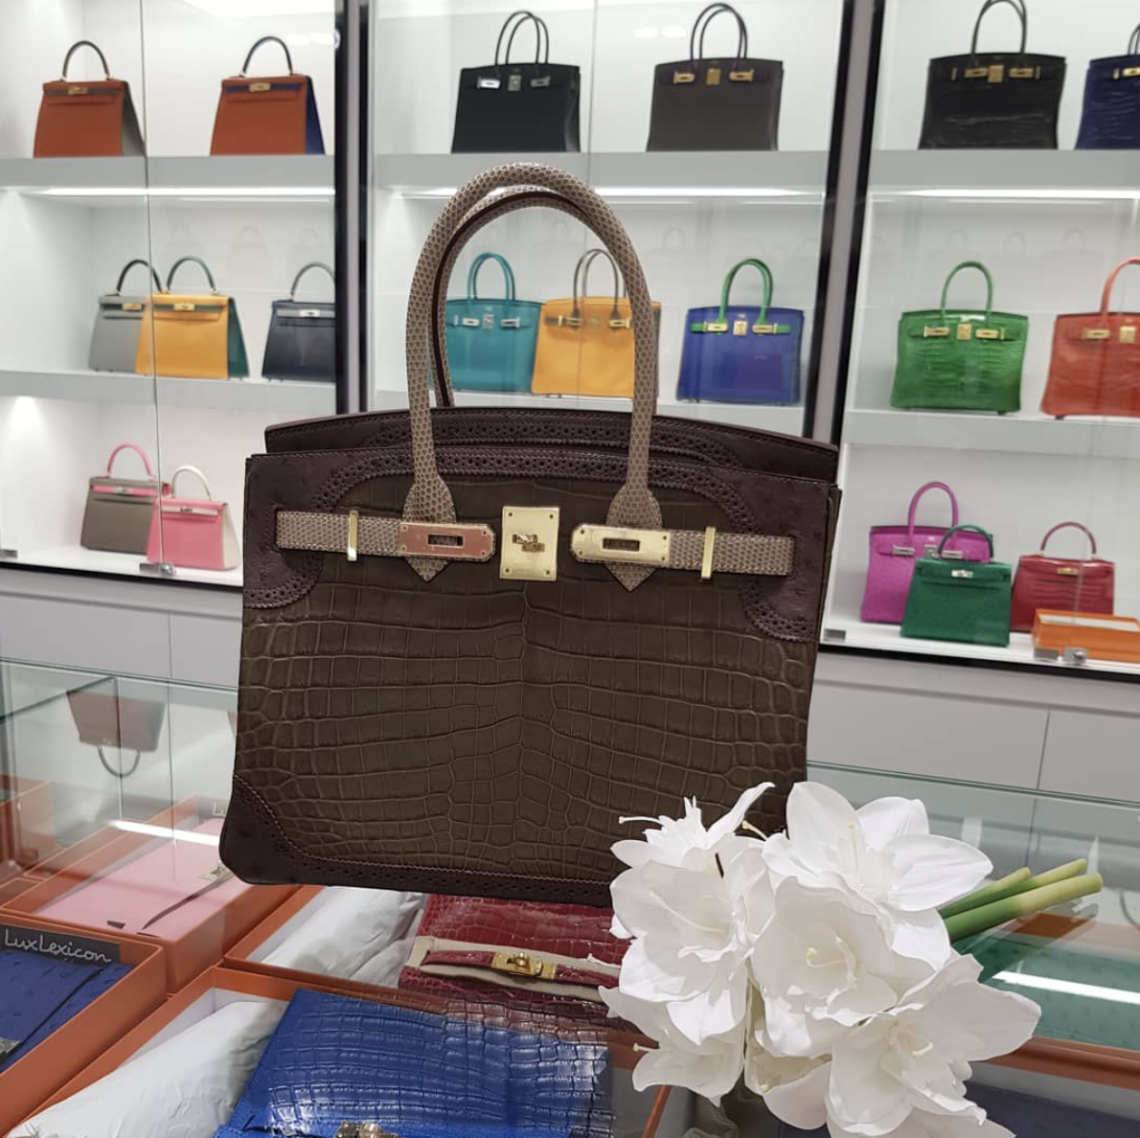 LARGEST RESELLER OF HERMÈS BAGS IN SINGAPORE